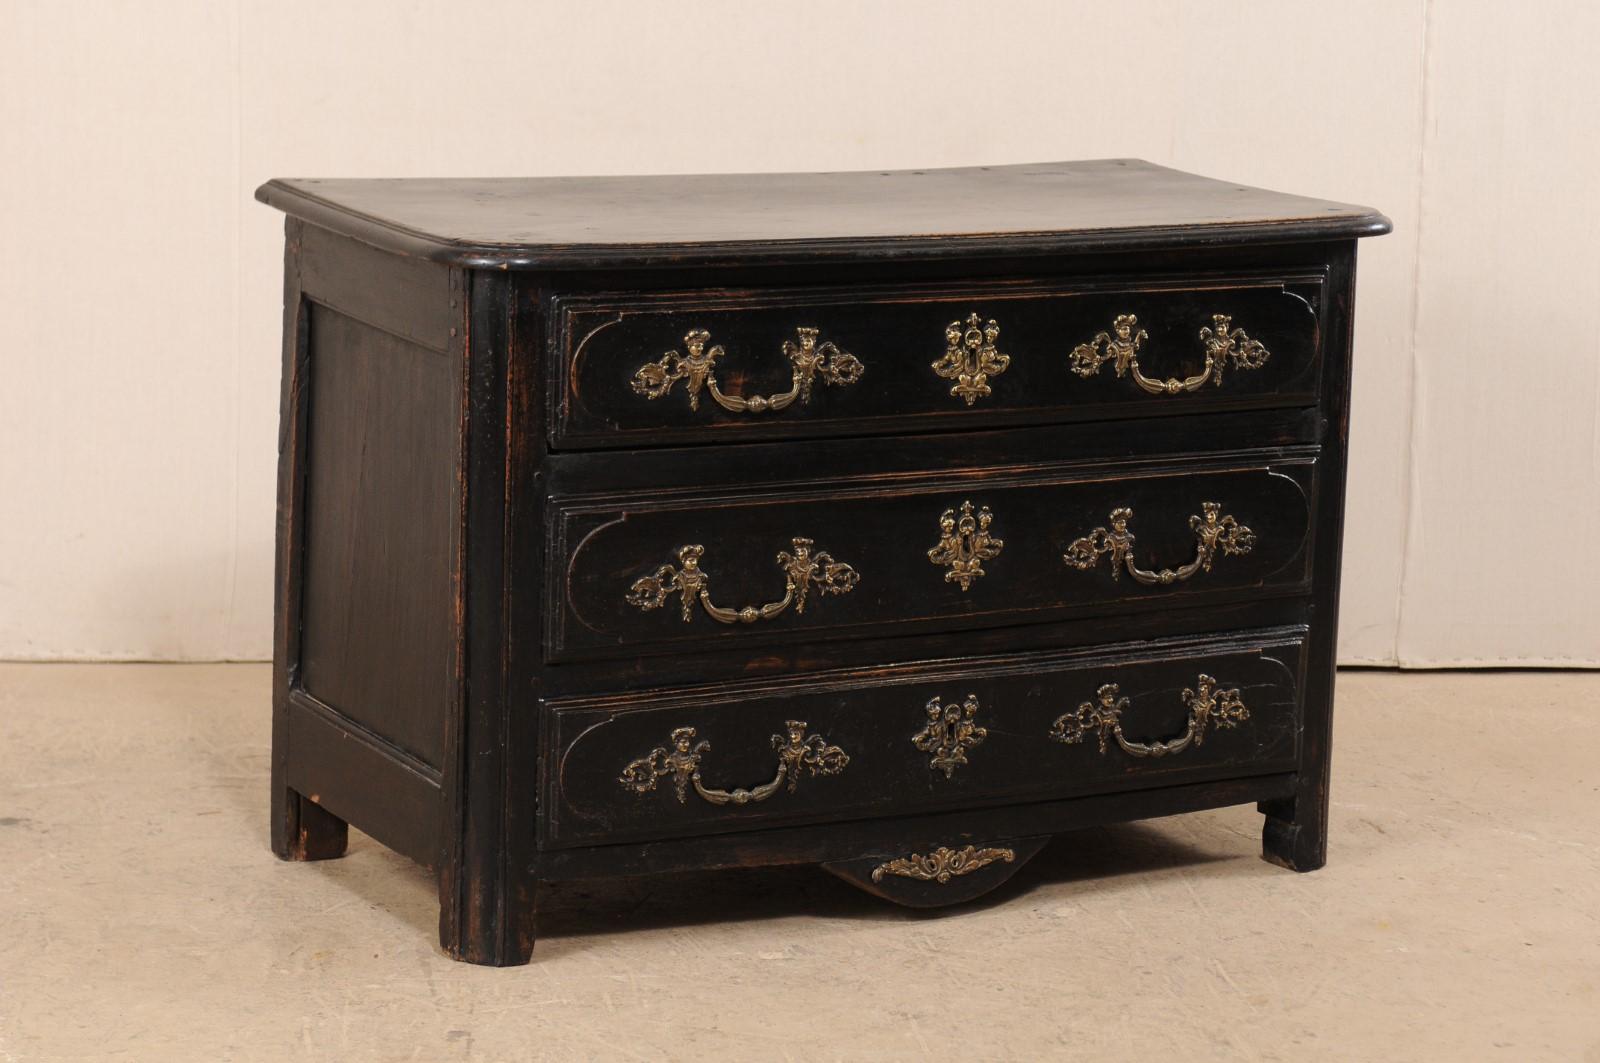 Carved Handsome 18th Century French Three-Drawer Wood Chest